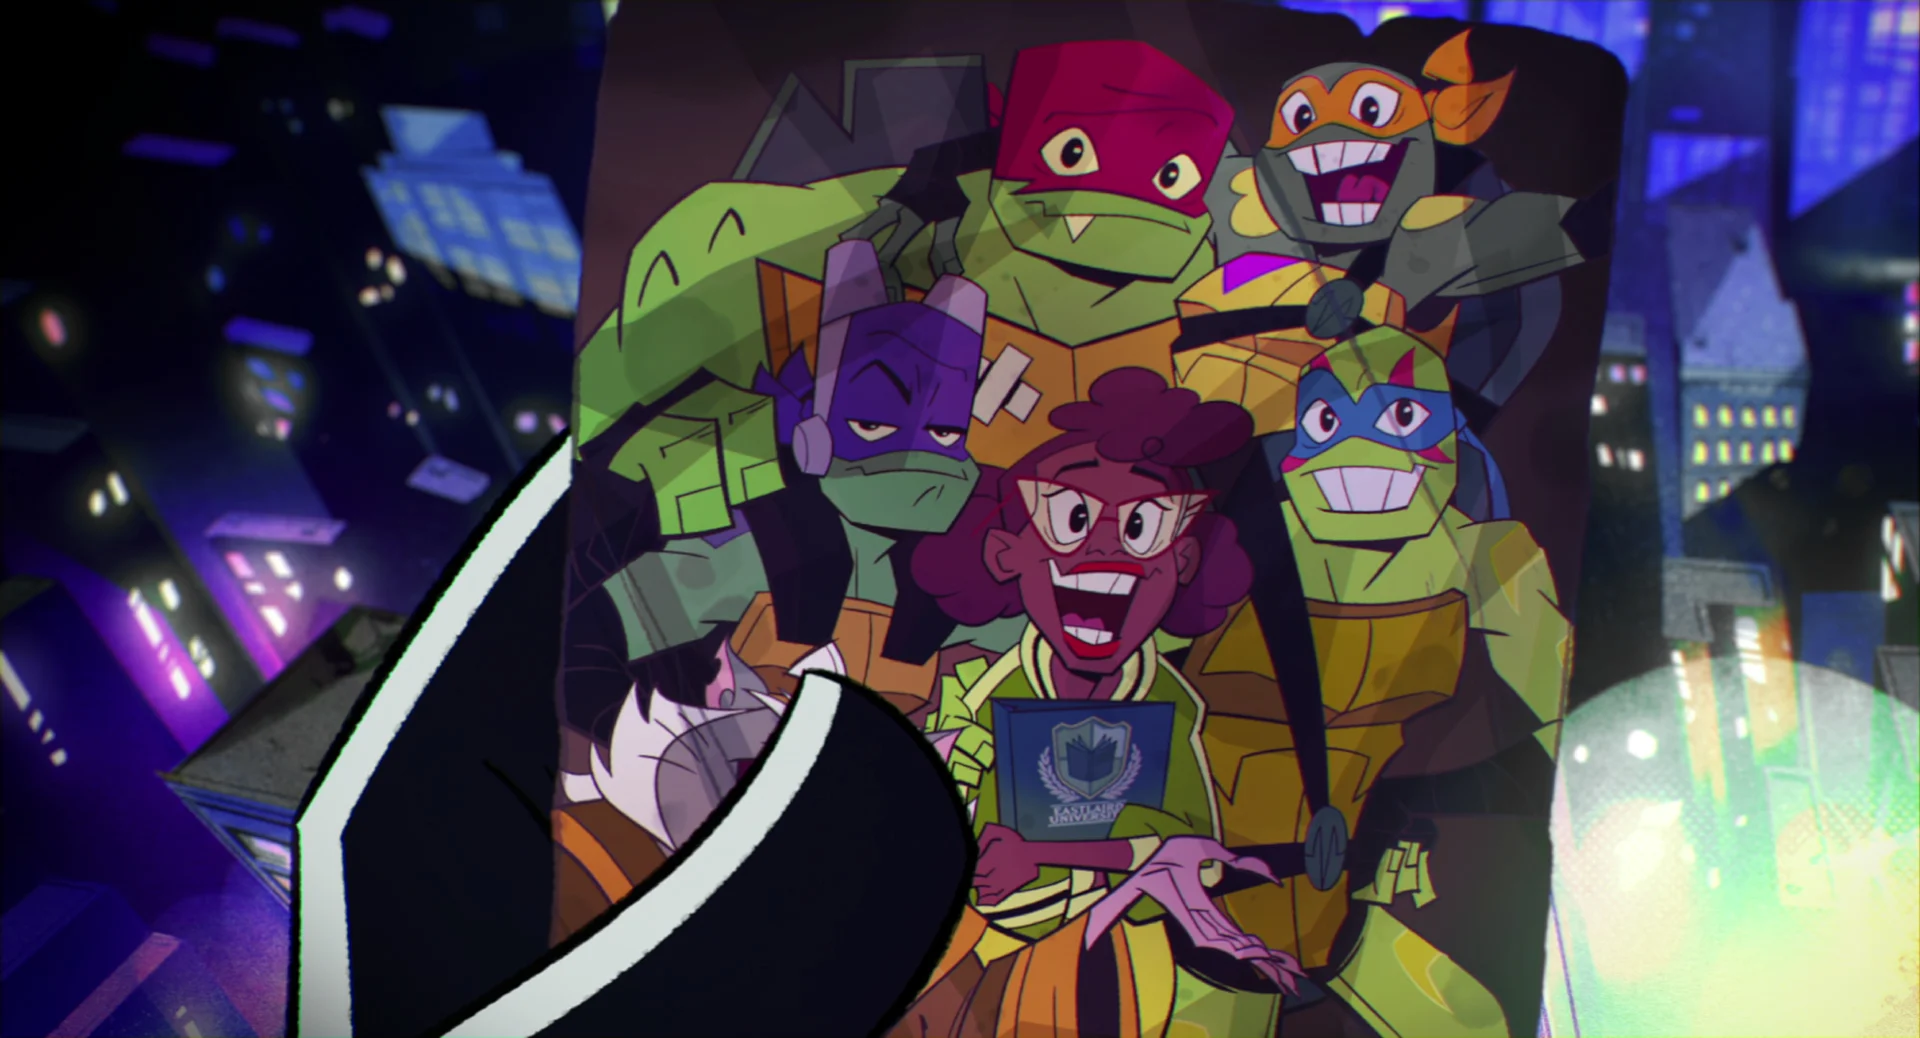 https://mamasgeeky.com/wp-content/uploads/2022/08/Rise_of_the_Teenage_Mutant_Ninja_Turtles__The_Movie_review.jpg.webp